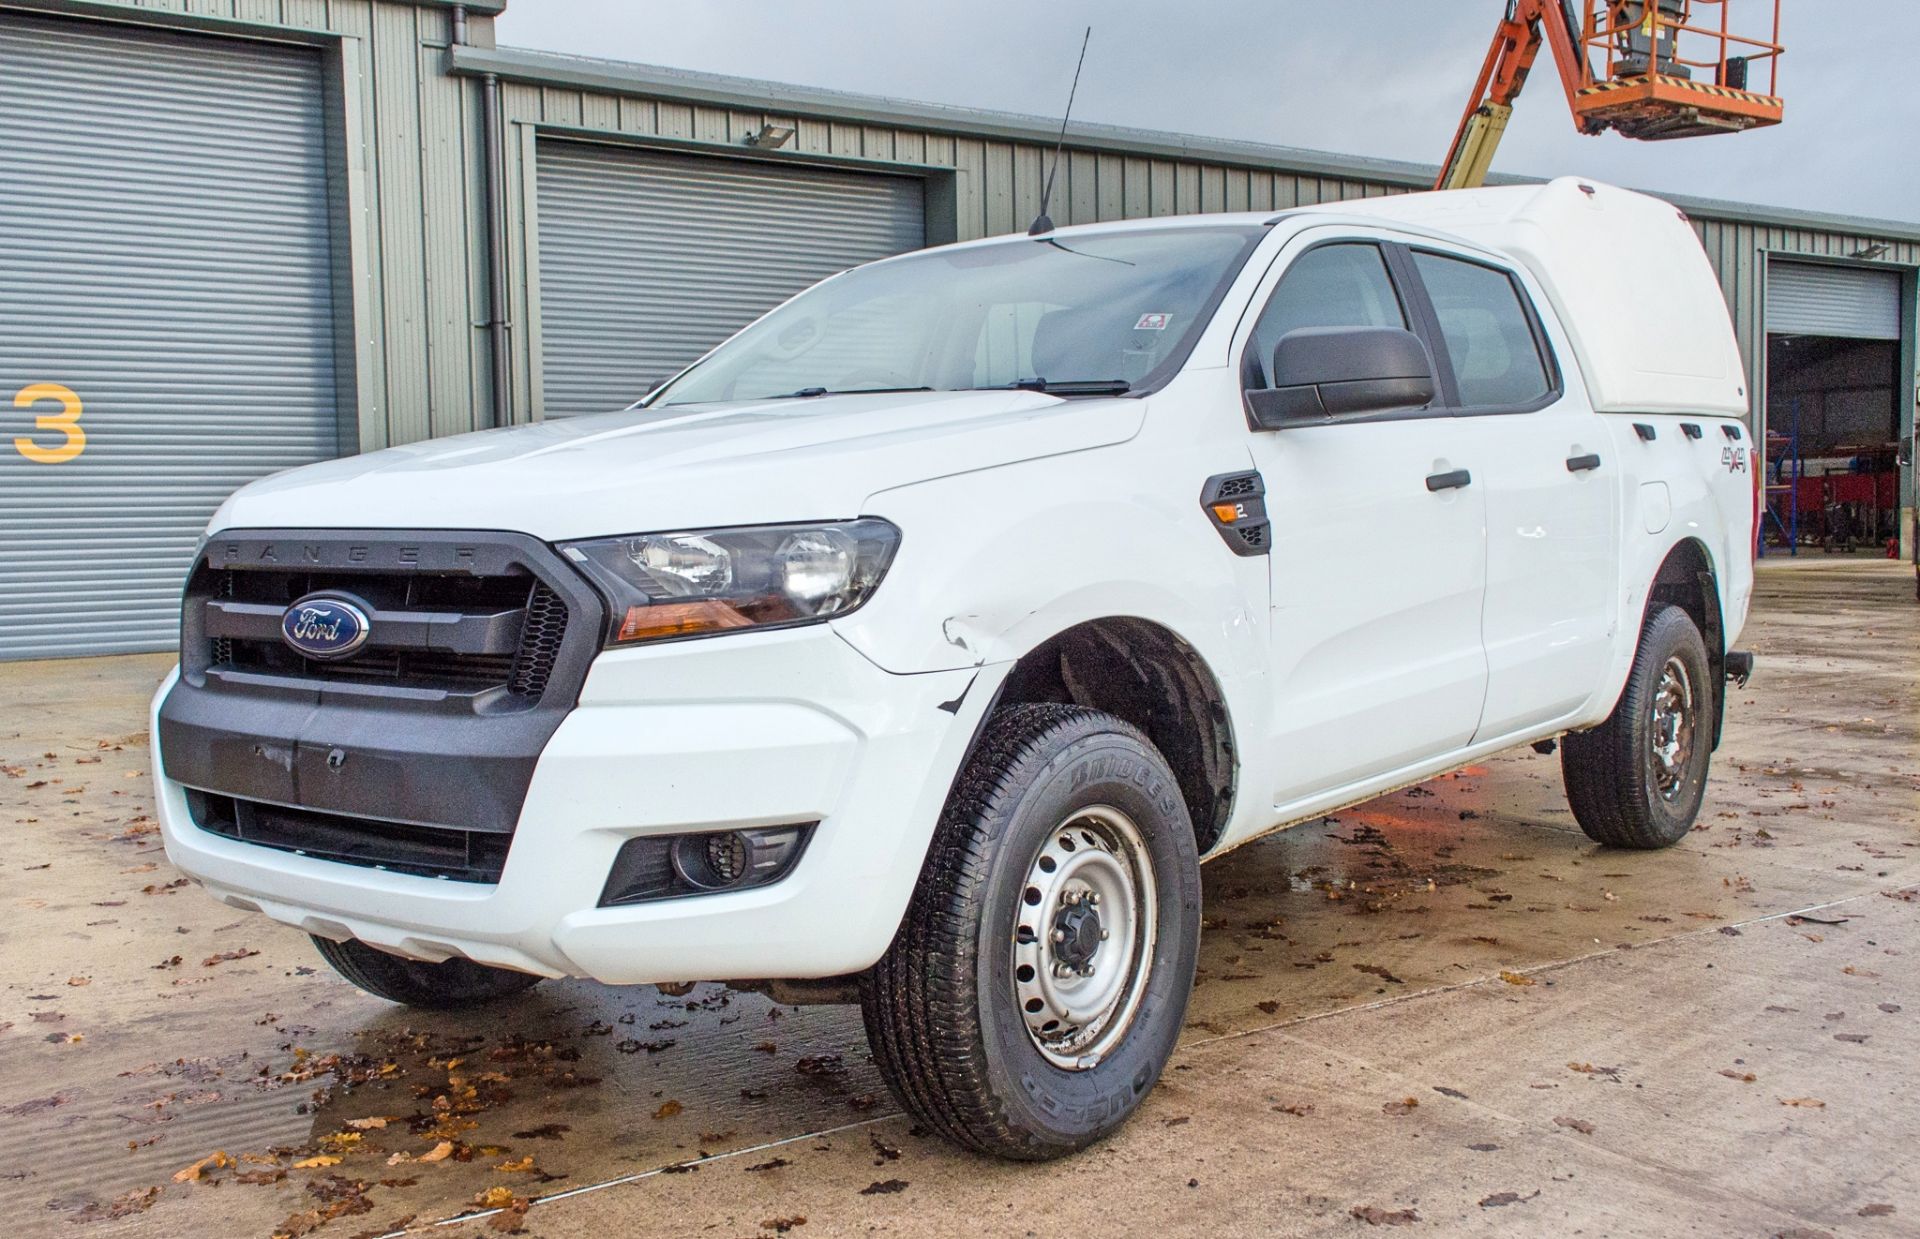 Ford Ranger 2.2 TDCi 160 XL manual 4x4 double cab pick up VIN: 6FPPXXMJ2PGL11353 Date of